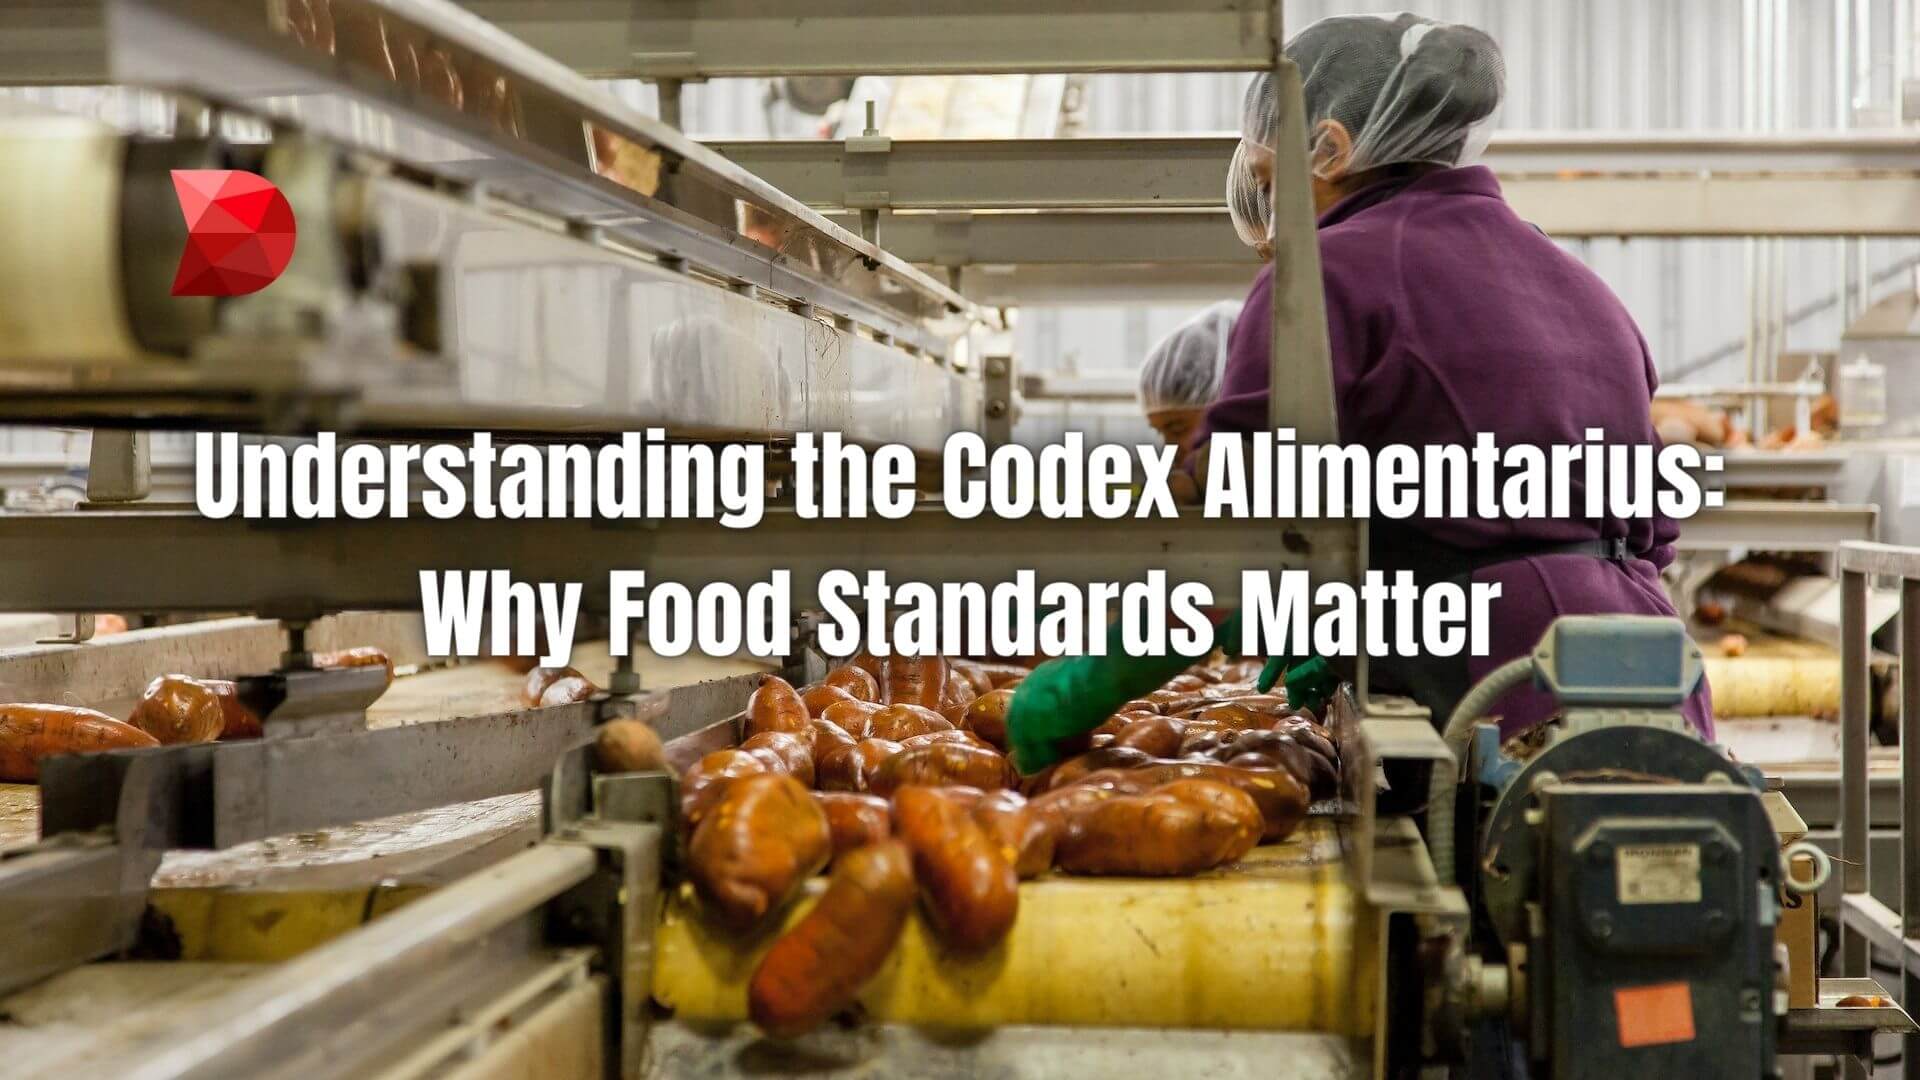 What are Haccp Standards?